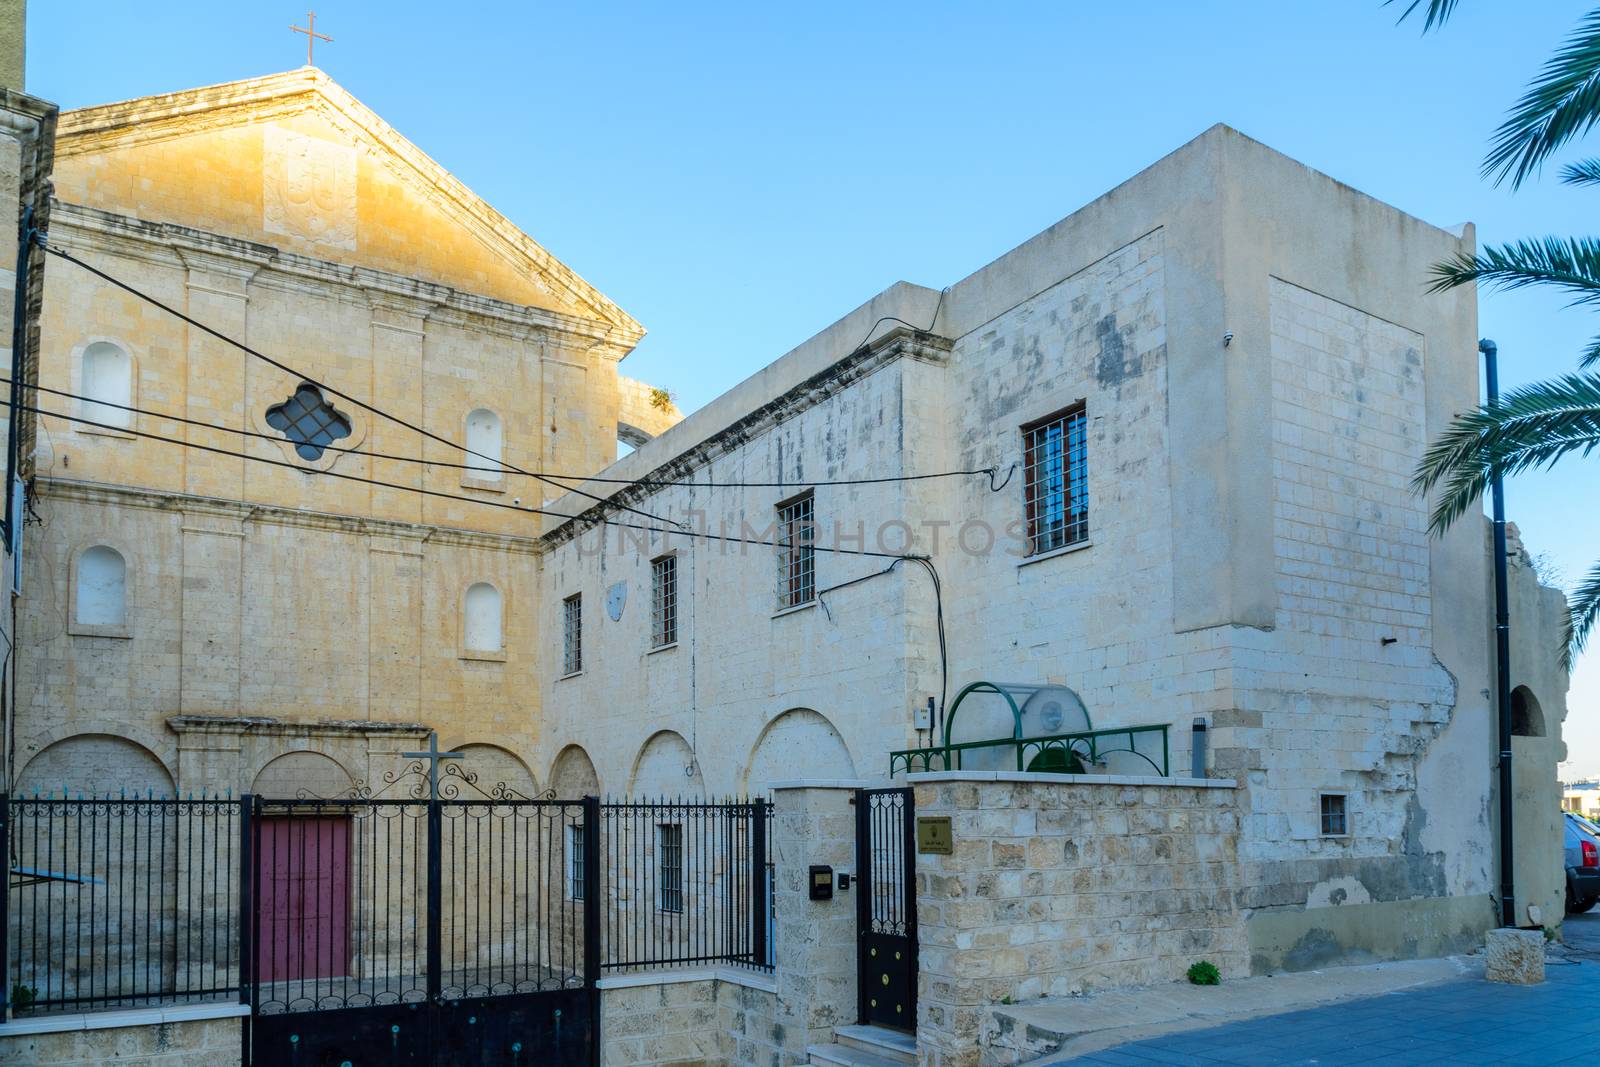 The monastery of the Discalced (barefoot) Carmelites in Paris square, downtown Haifa, Israel